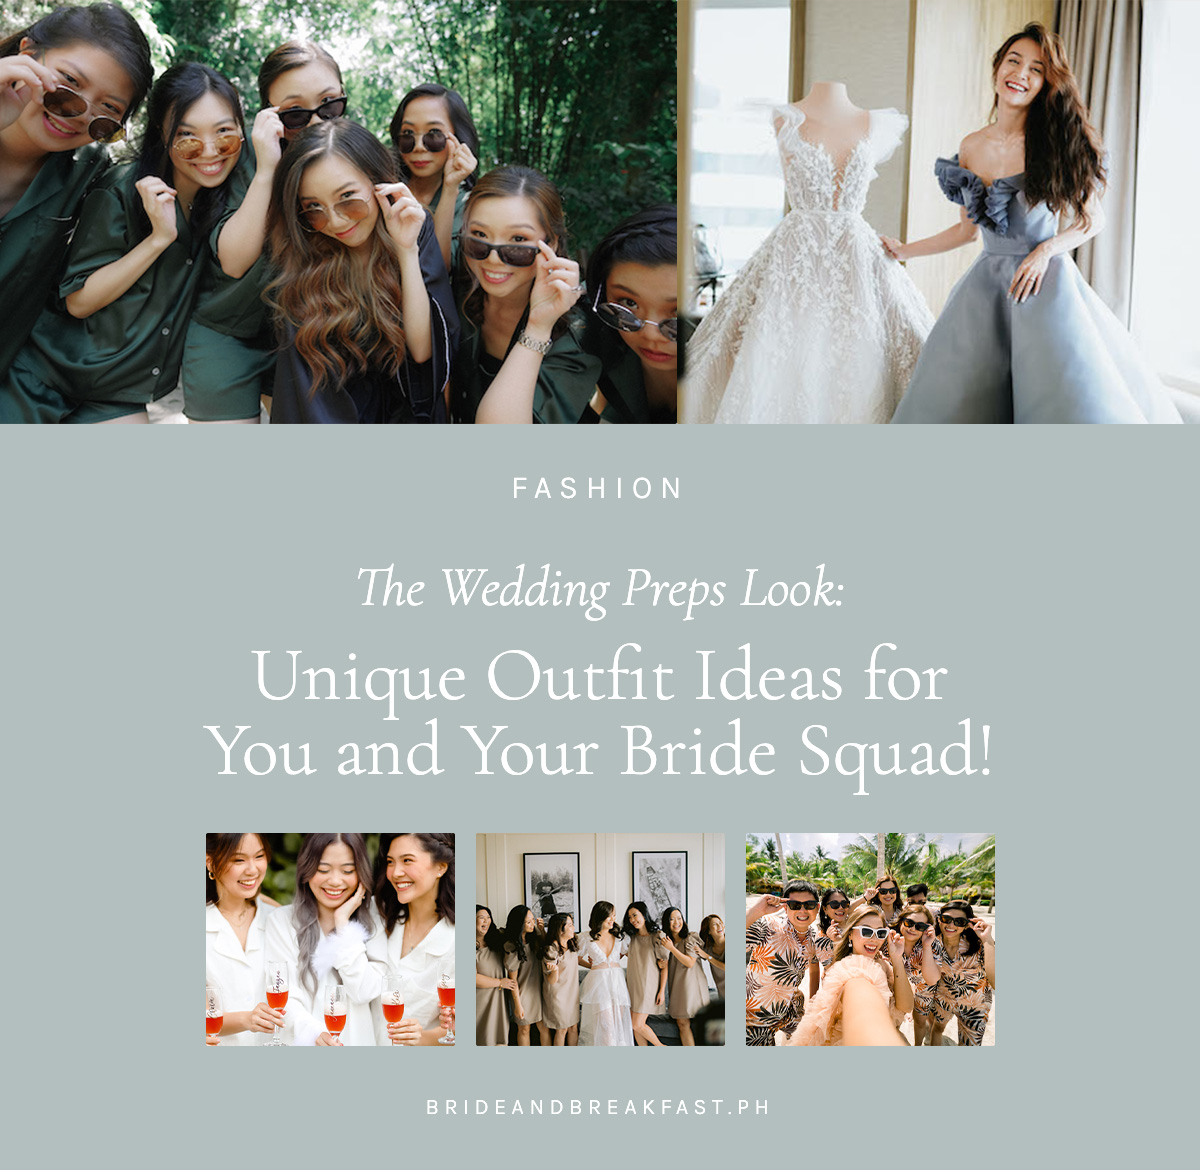 The Wedding Preps Look: Unique Outfit Ideas for You and Your Bride Squad!